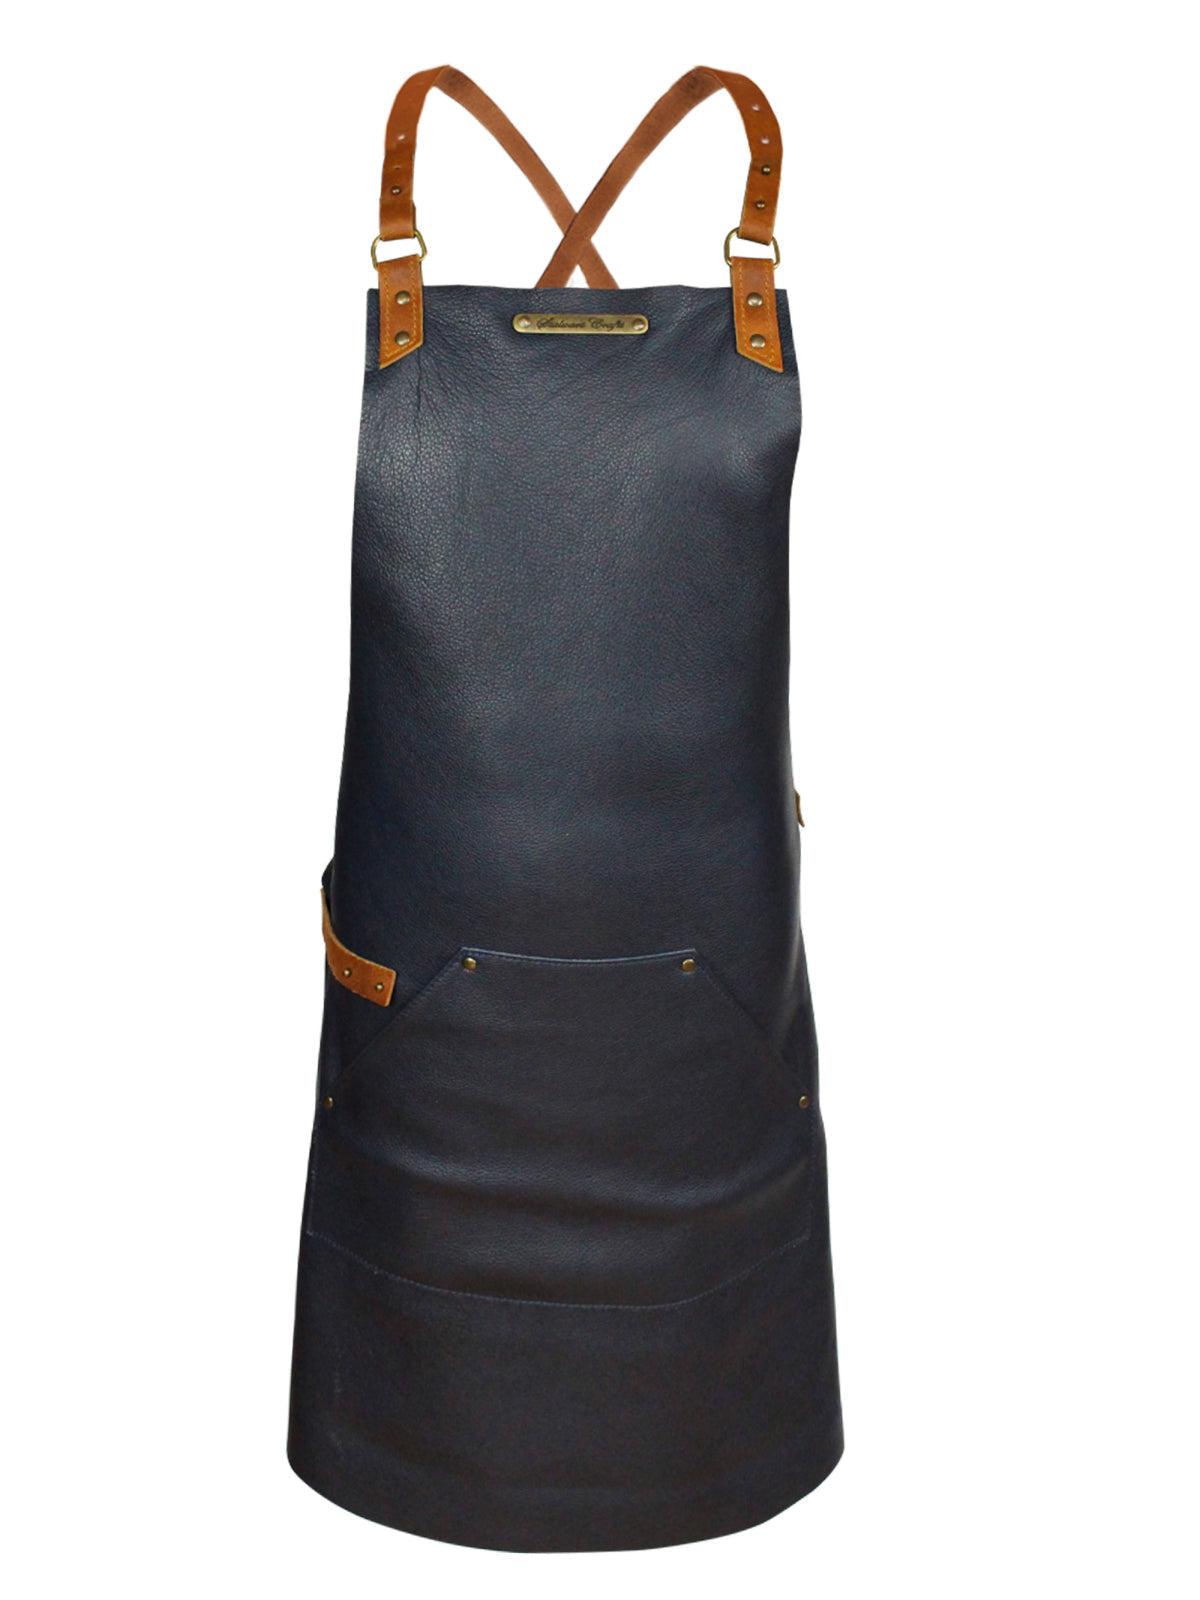 Leather Apron Cross Strap Deluxe Marine by Stalwart -  ChefsCotton